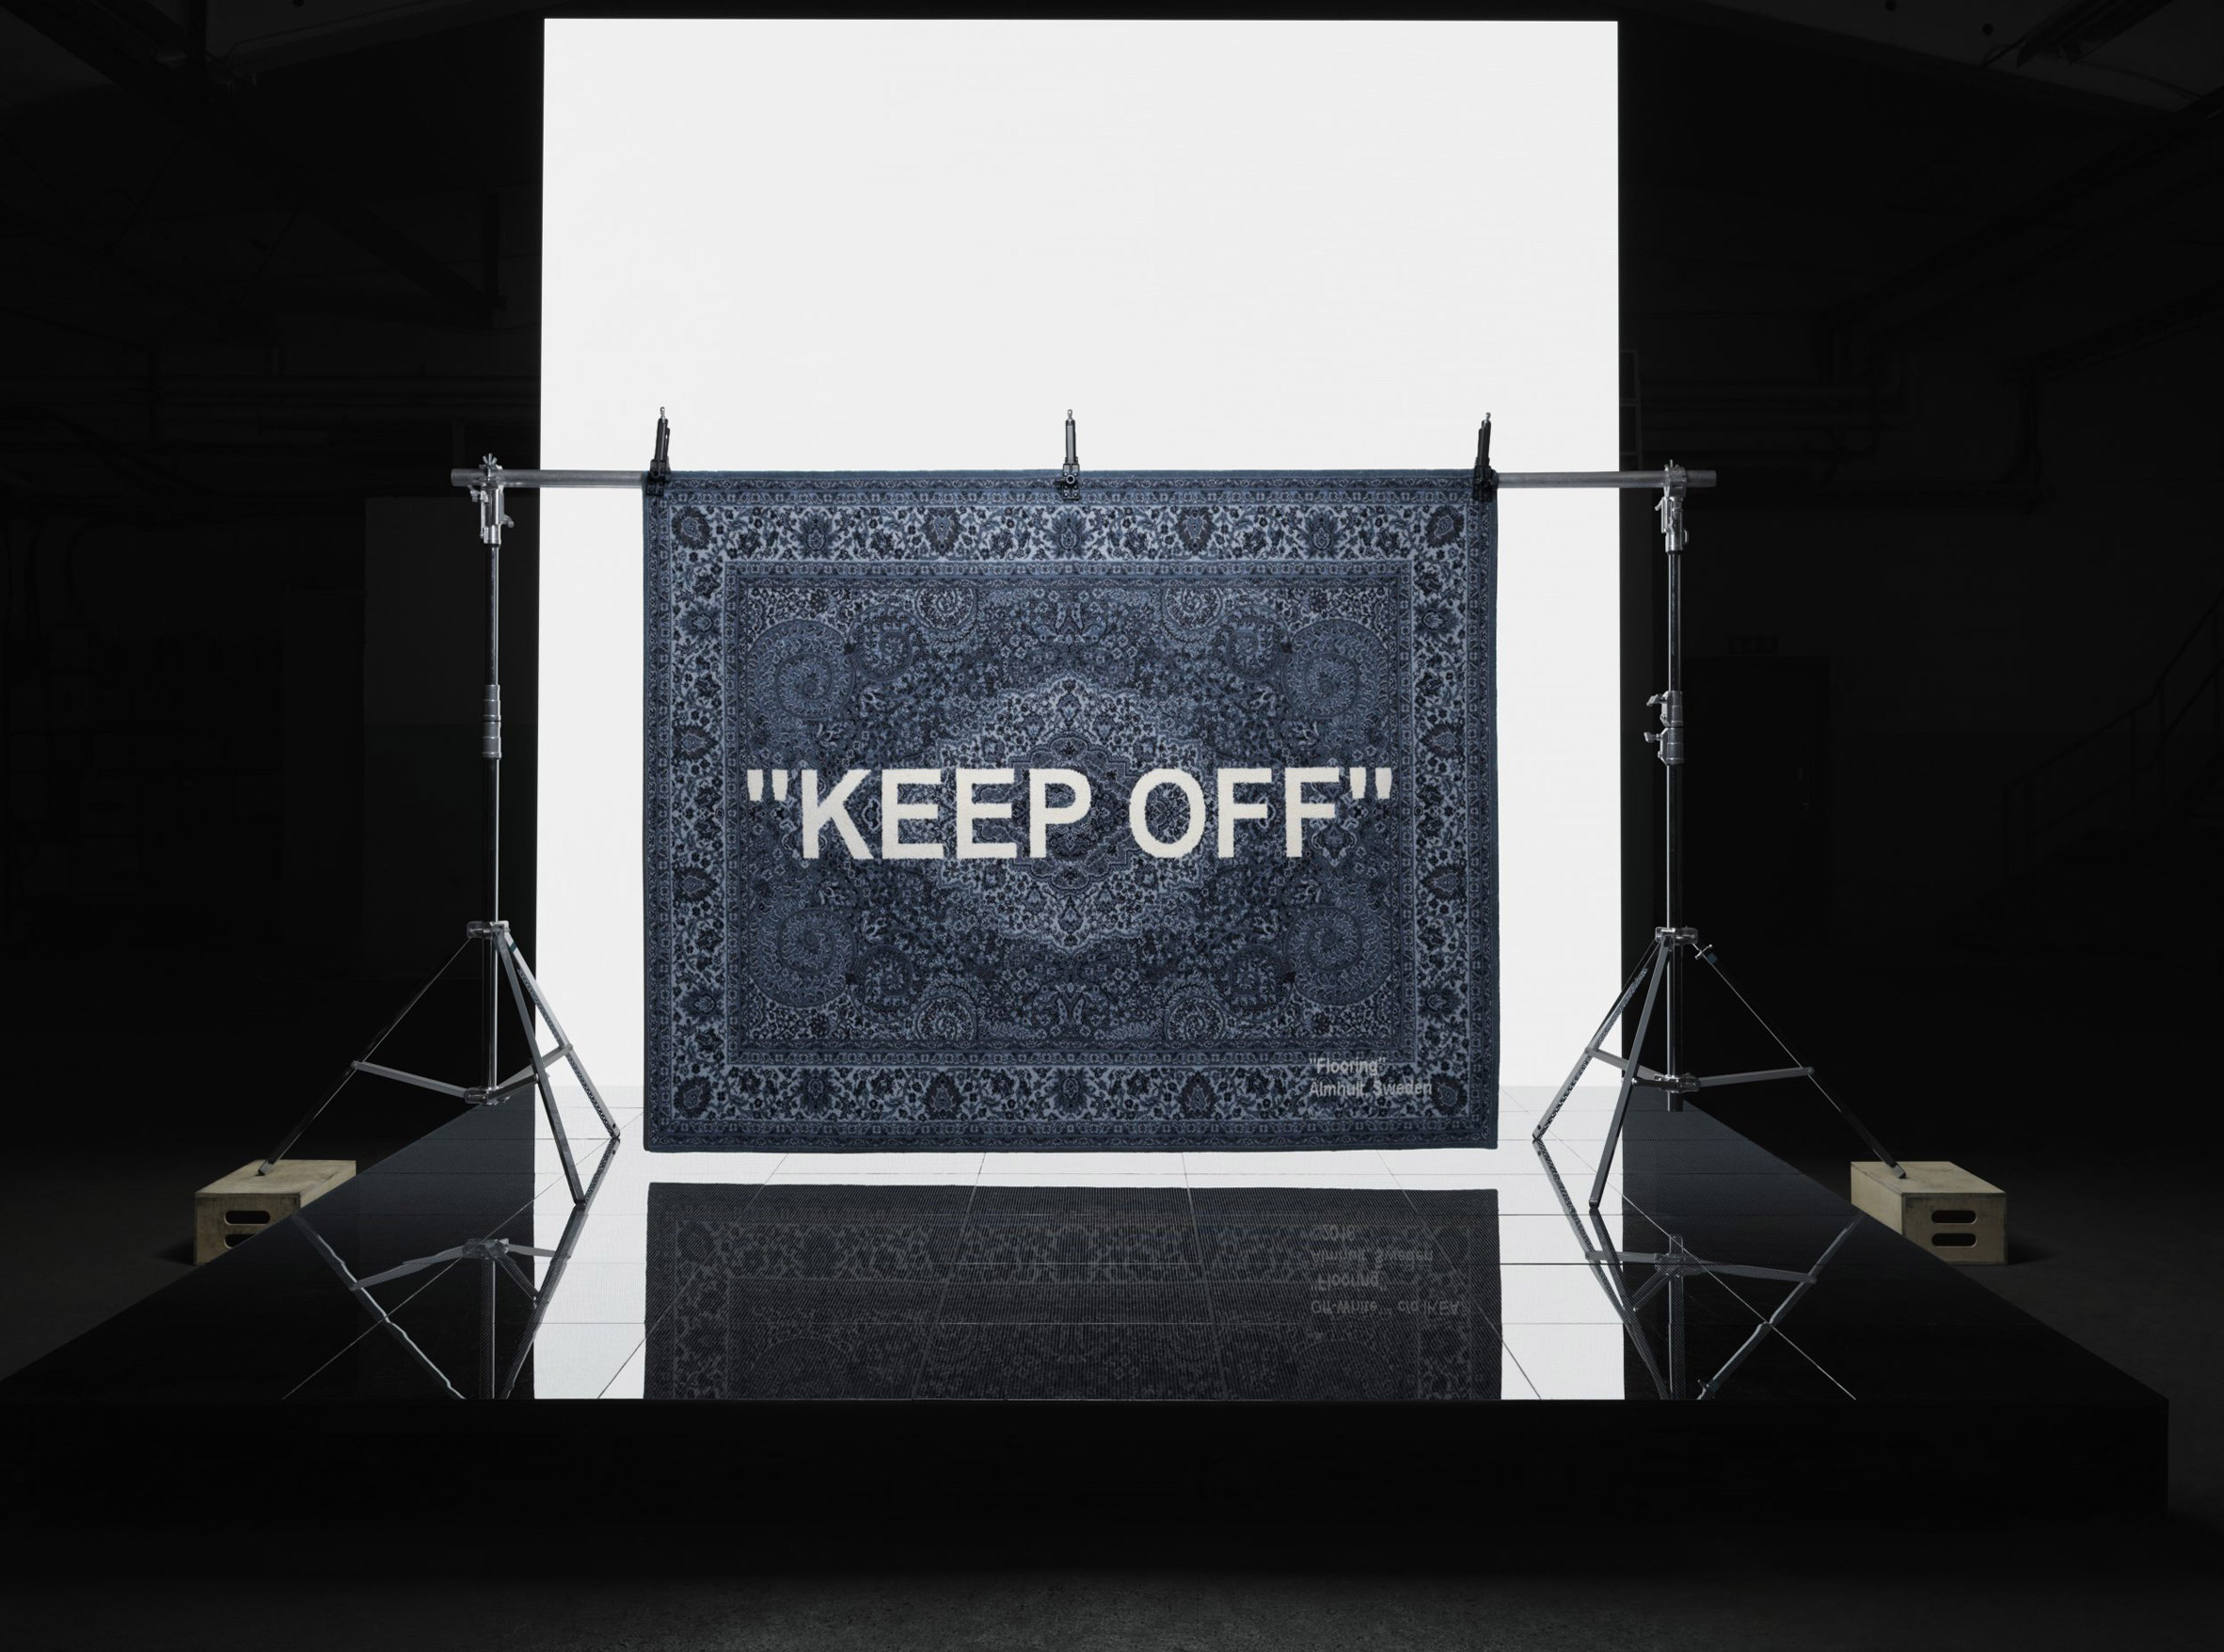 Virgil Abloh and Craig Green among designers of IKEA's collection of  statement rugs